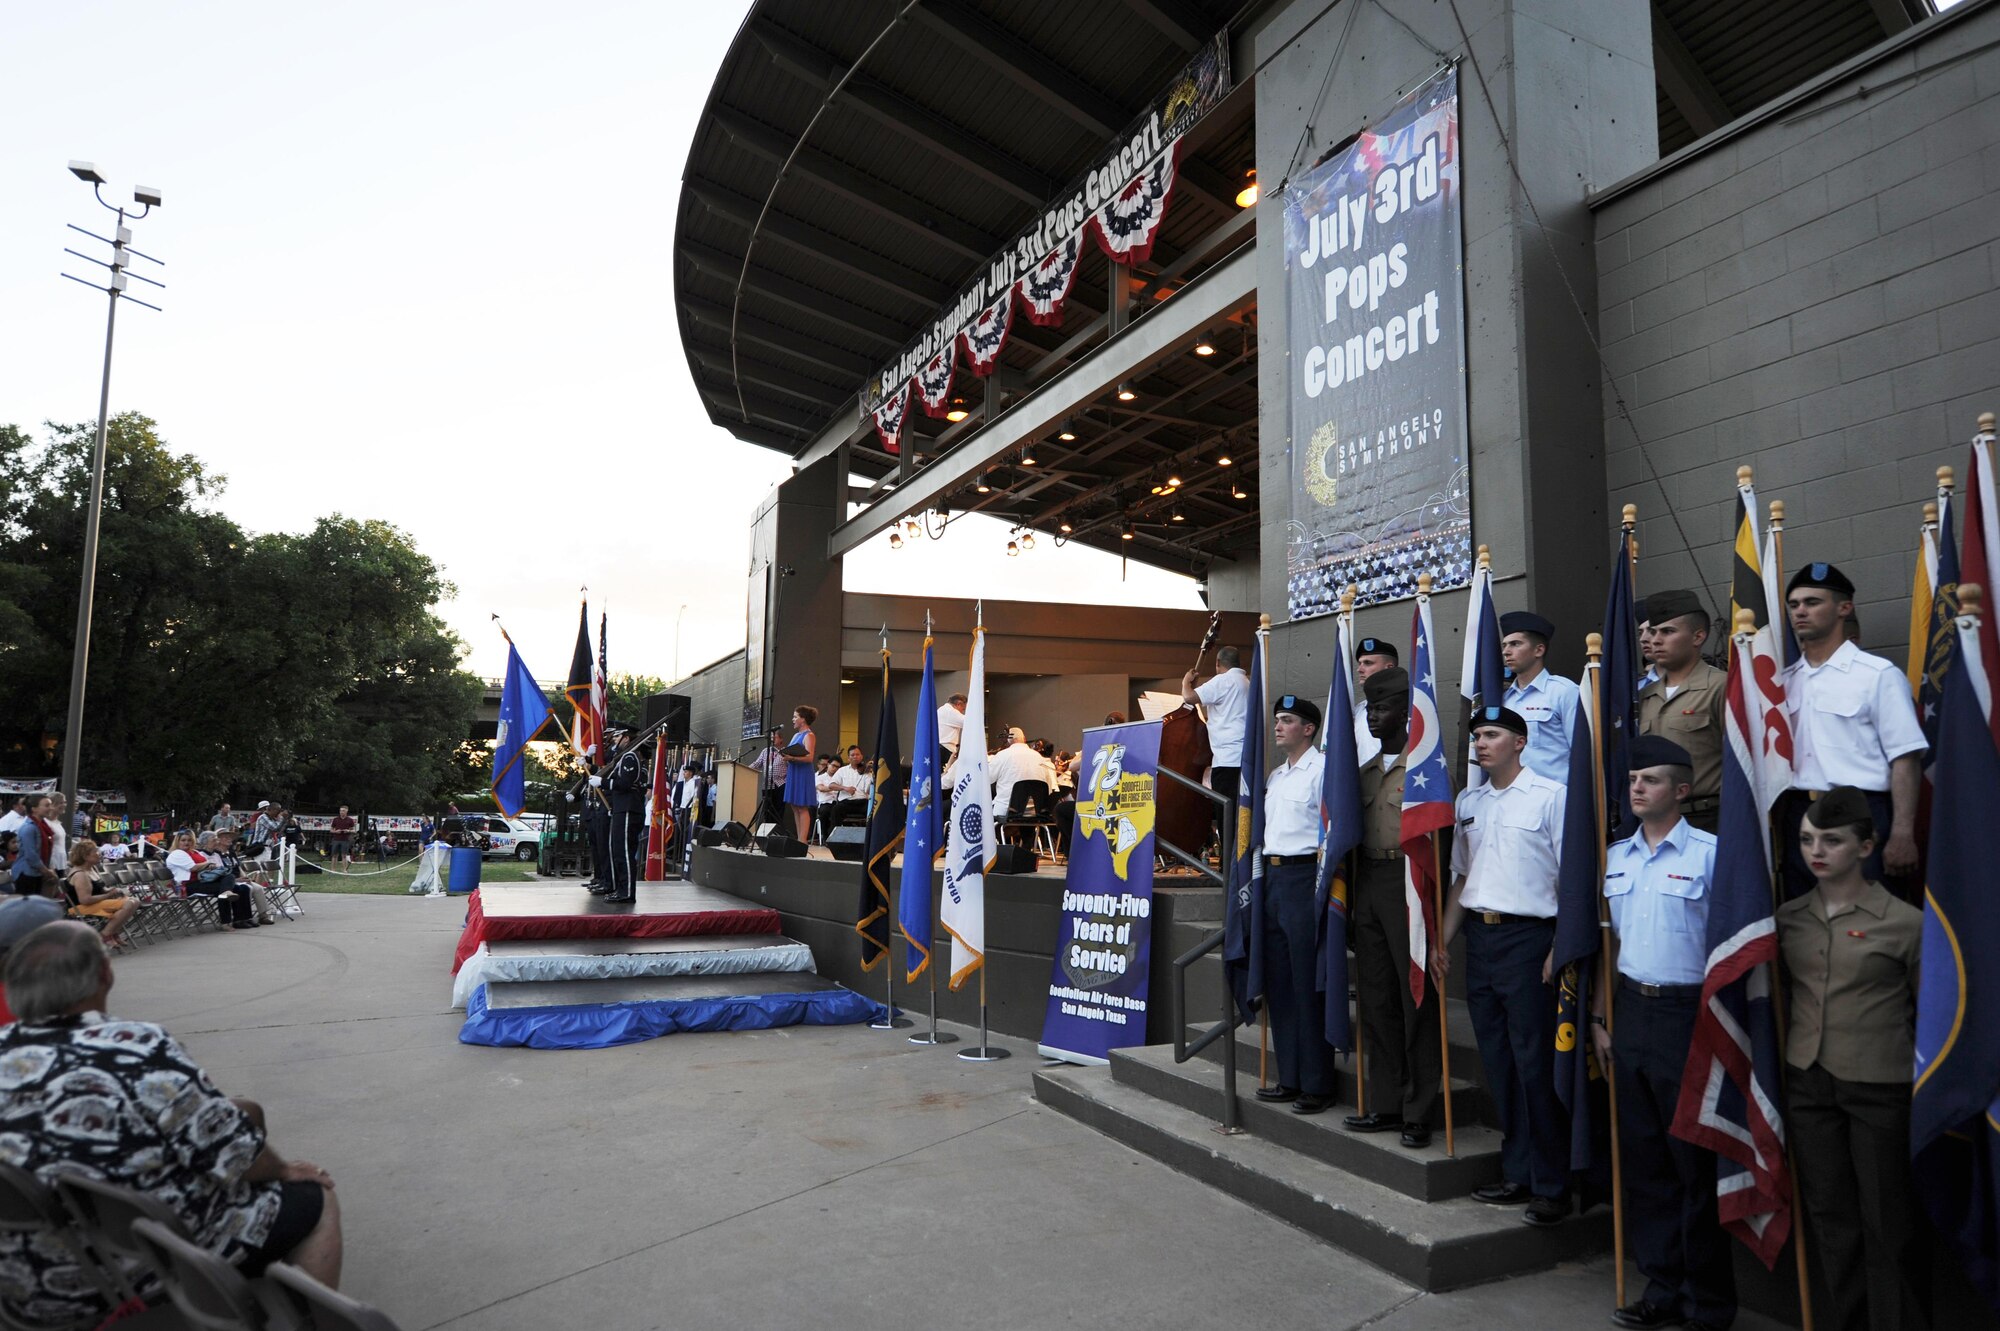 The Goodfellow Air Force Base Honor Guard presents the colors while service members display state flags during the 29th Annual San Angelo Symphony July 3rd Pops Concert at the Bill Aylor Sr. Memorial RiverStage in San Angelo, Texas, July 3, 2016. While the service members presented the flags, the San Angelo Symphony played “A Salute to the Armed Forces.” (U.S. Air Force photo by Senior Airman Joshua Edwards/Released)